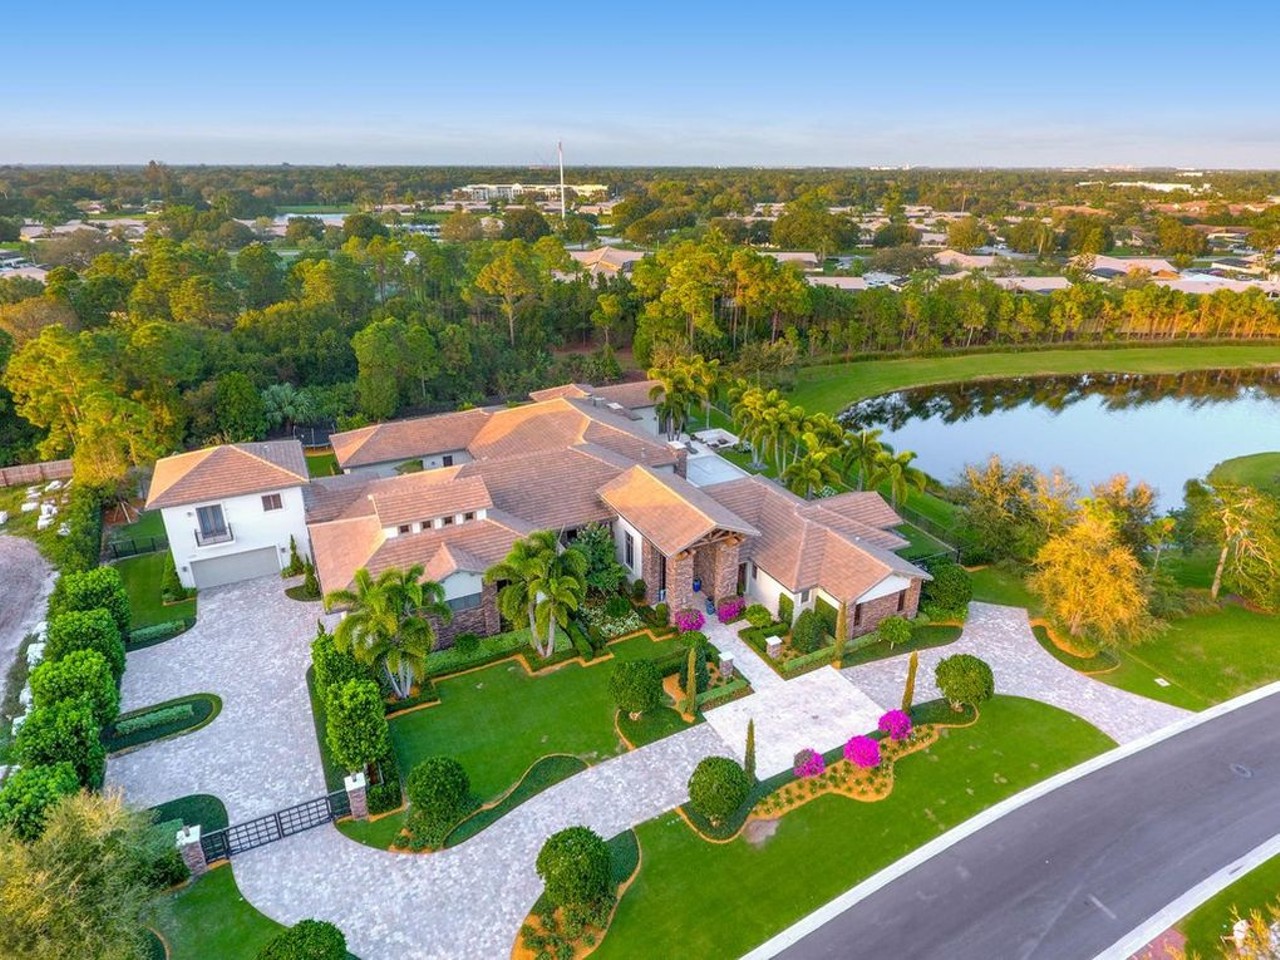 St. Louis Cardinal Paul Goldschmidt Buys Tricked Out Florida Mansion [PHOTOS]